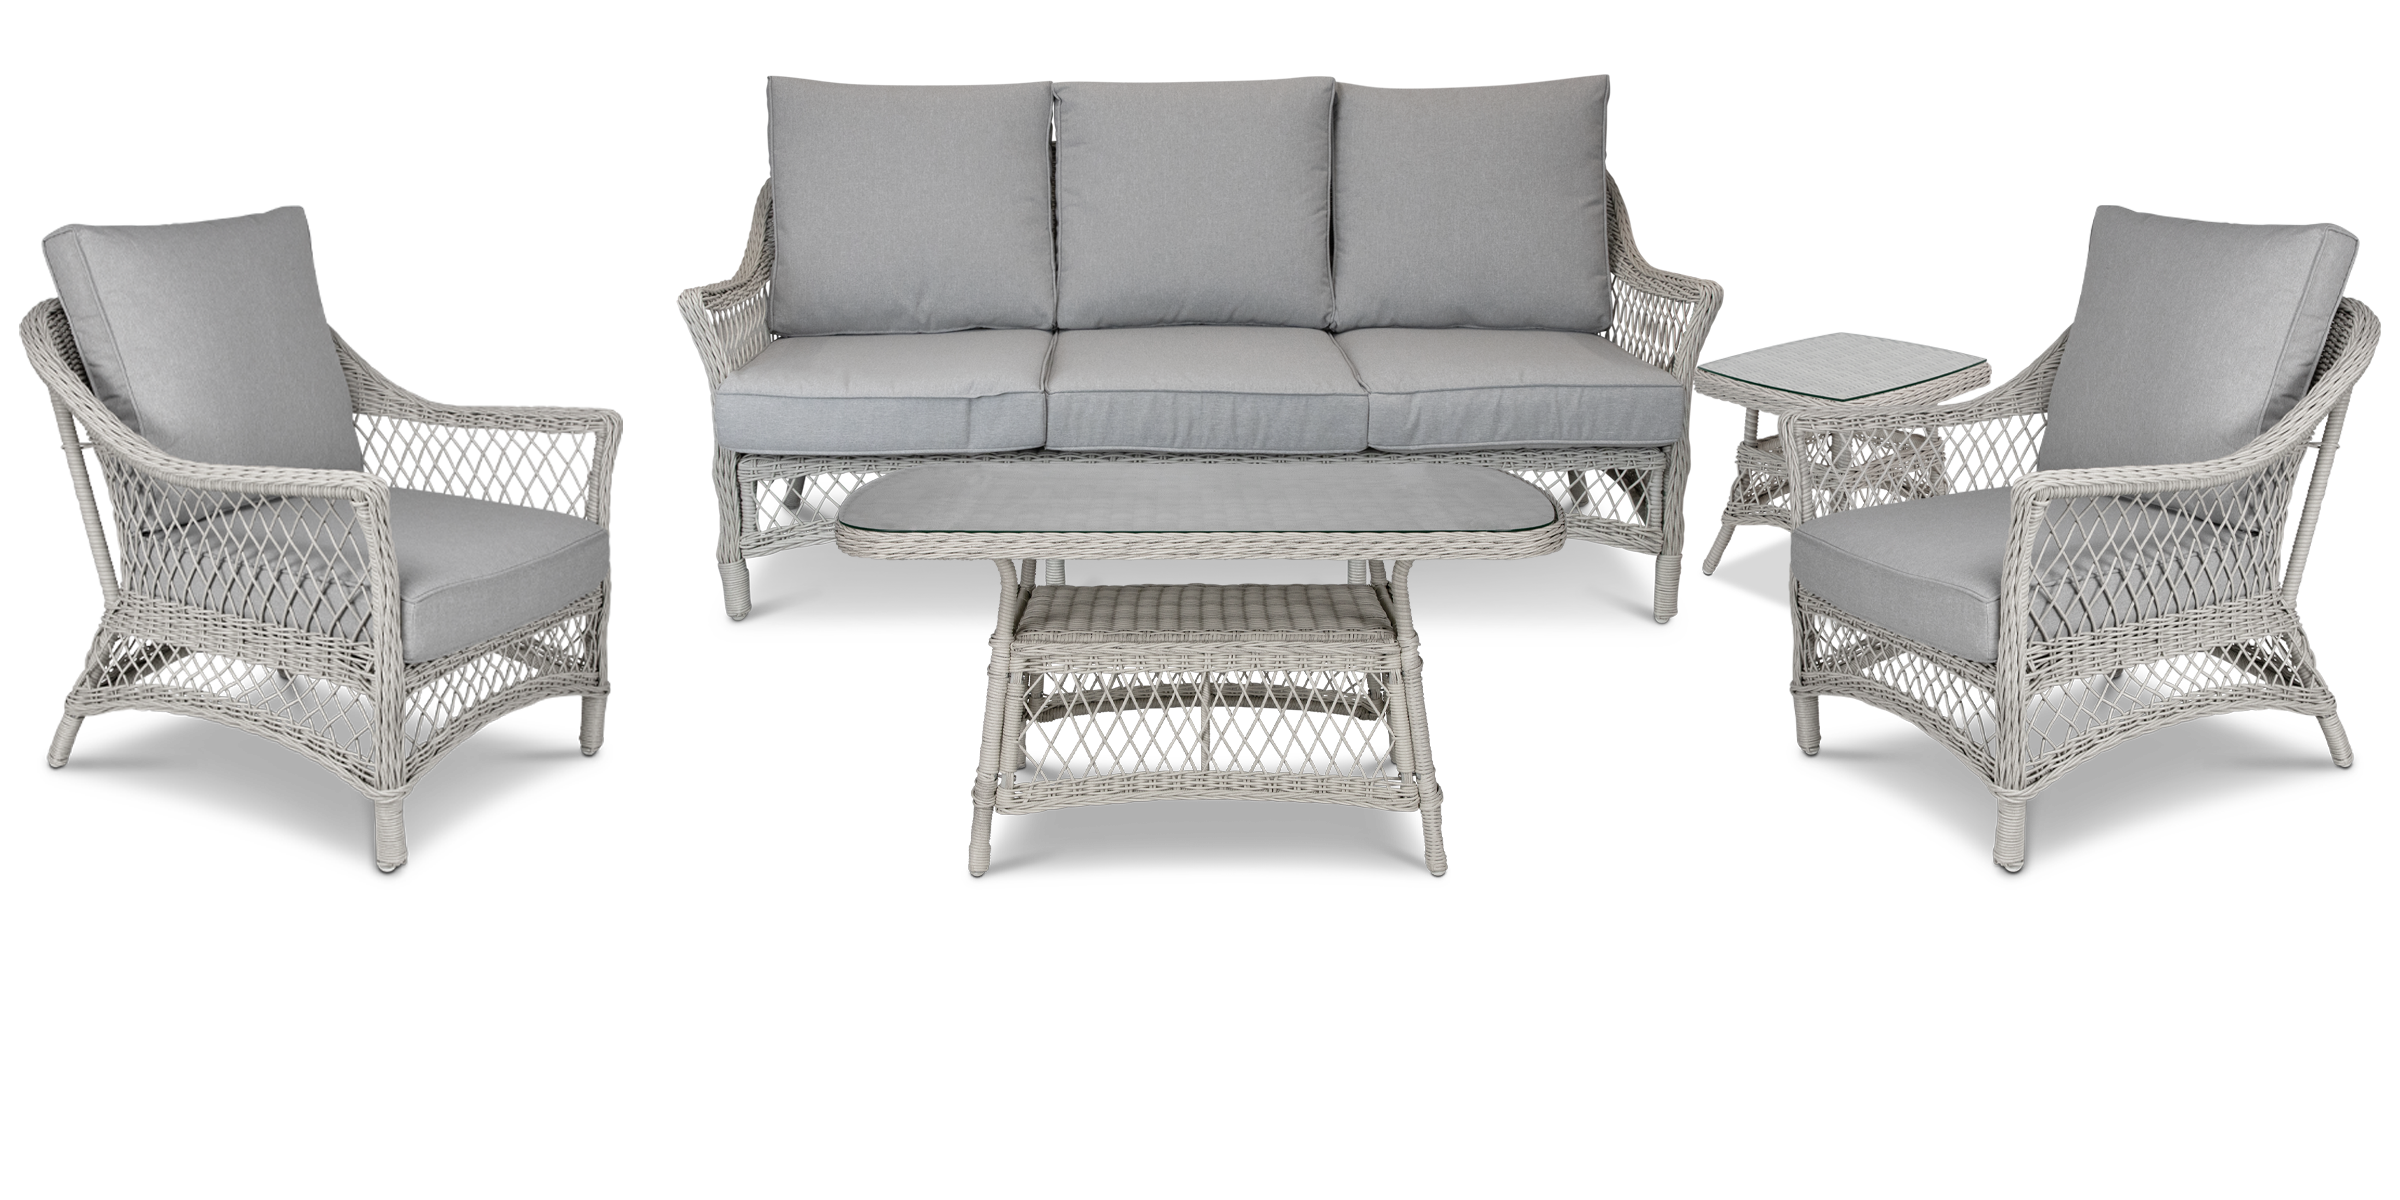 Hamptons Outdoor Wicker Lounge with 3 Seater, 2 x Armchairs, Coffee & Side Table in Dune Spunpoly Cushions